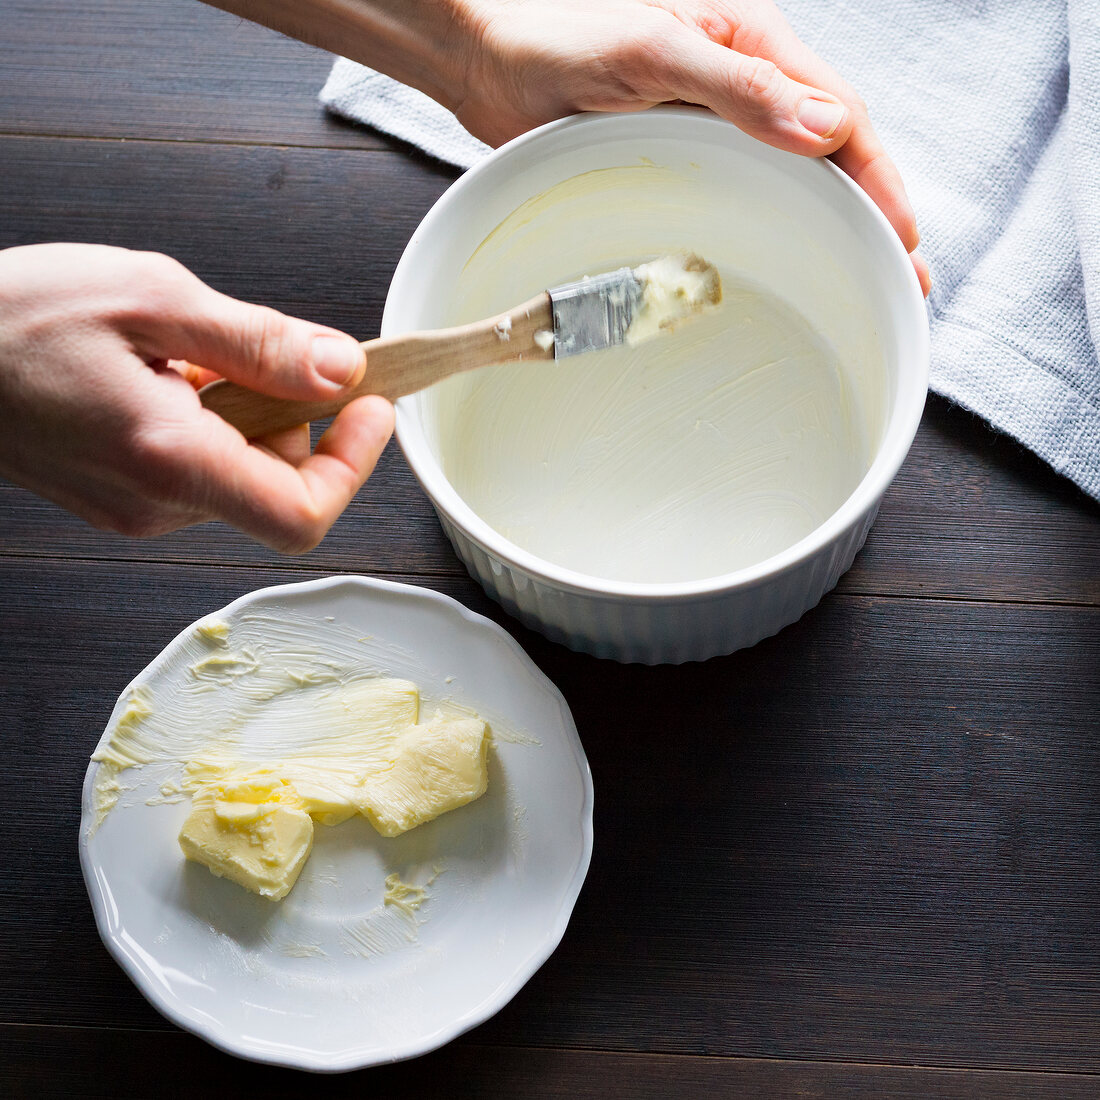 Close-up of man's hand greasing with butter in baking bowl on wooden table